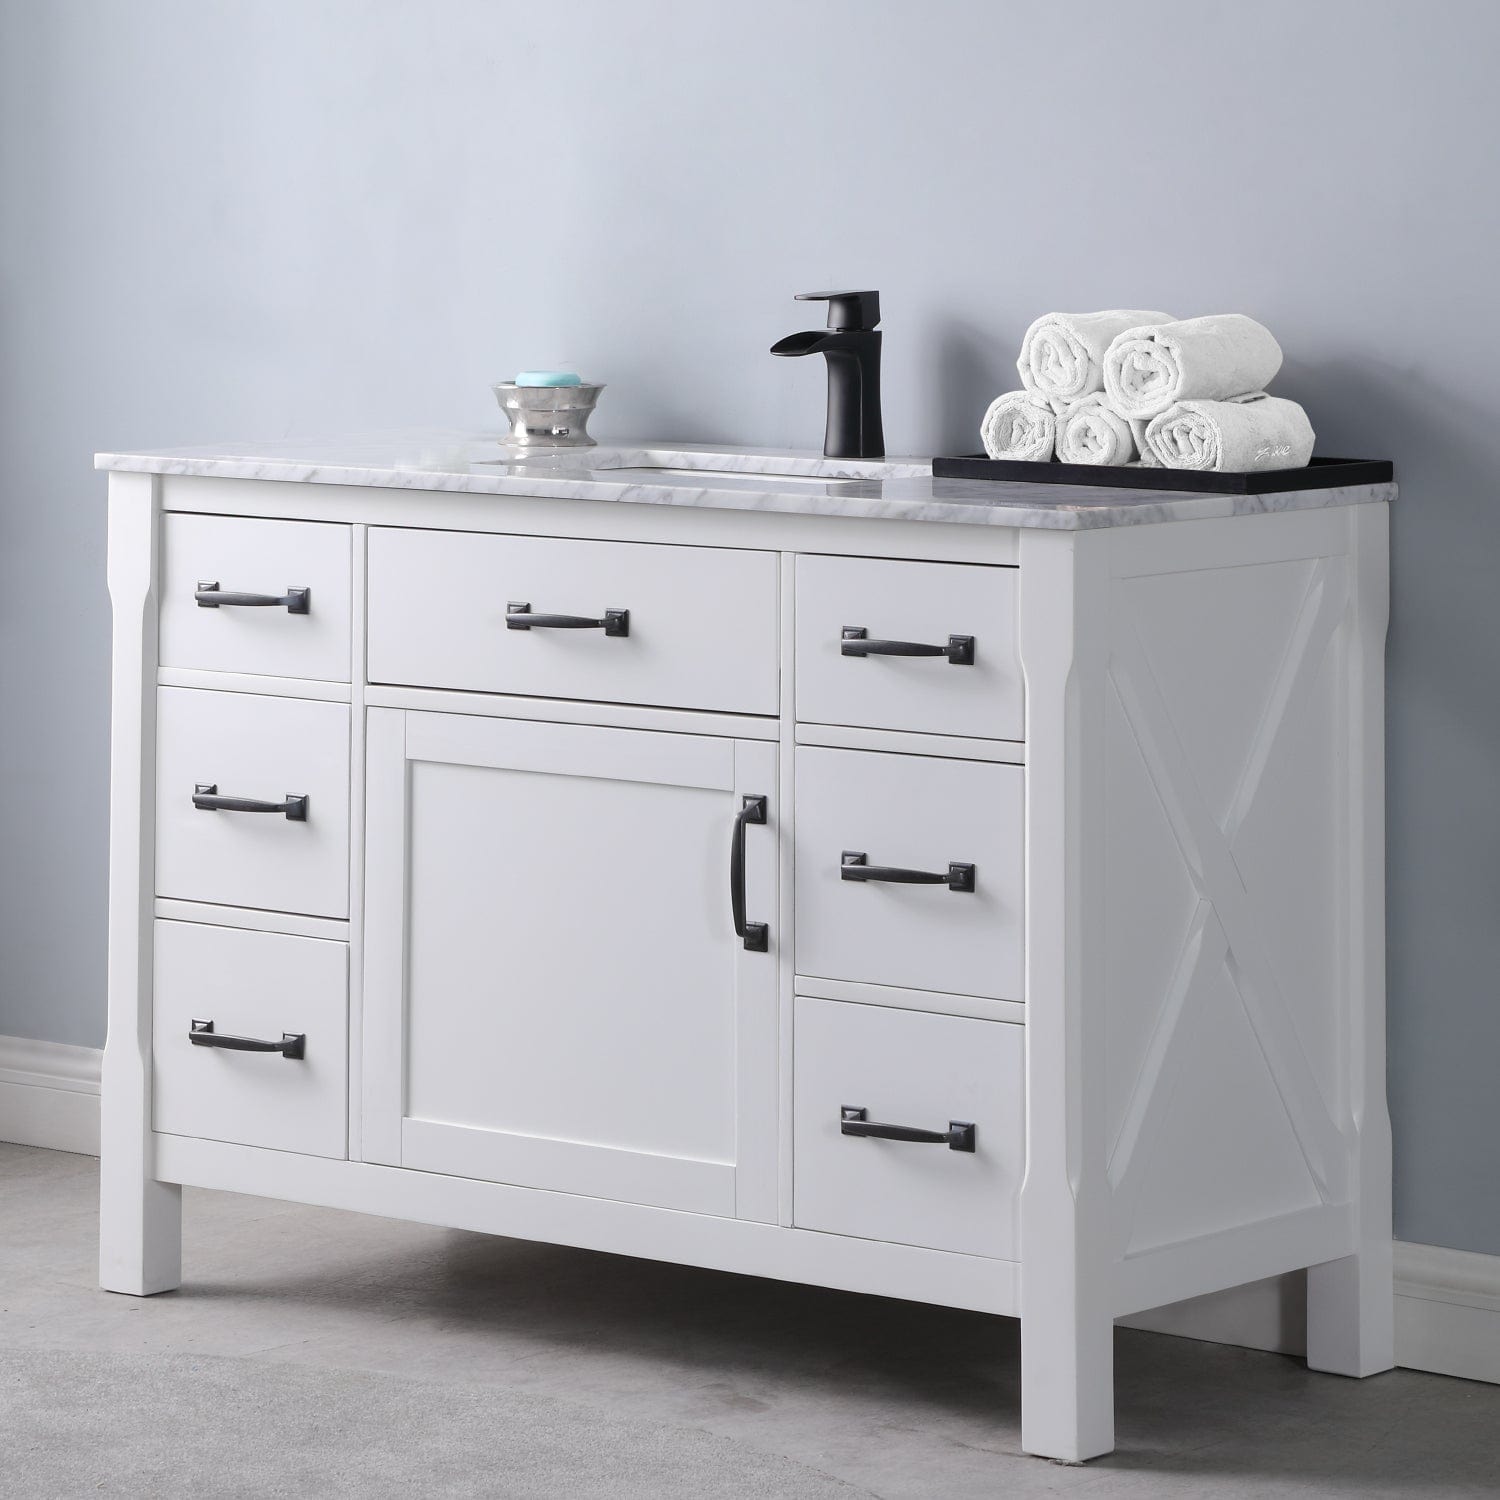 Altair Maribella 48" Single Bathroom Vanity Set in White and Carrara White Marble Countertop without Mirror 535048-WH-CA-NM - Molaix631112970341Vanity535048-WH-CA-NM